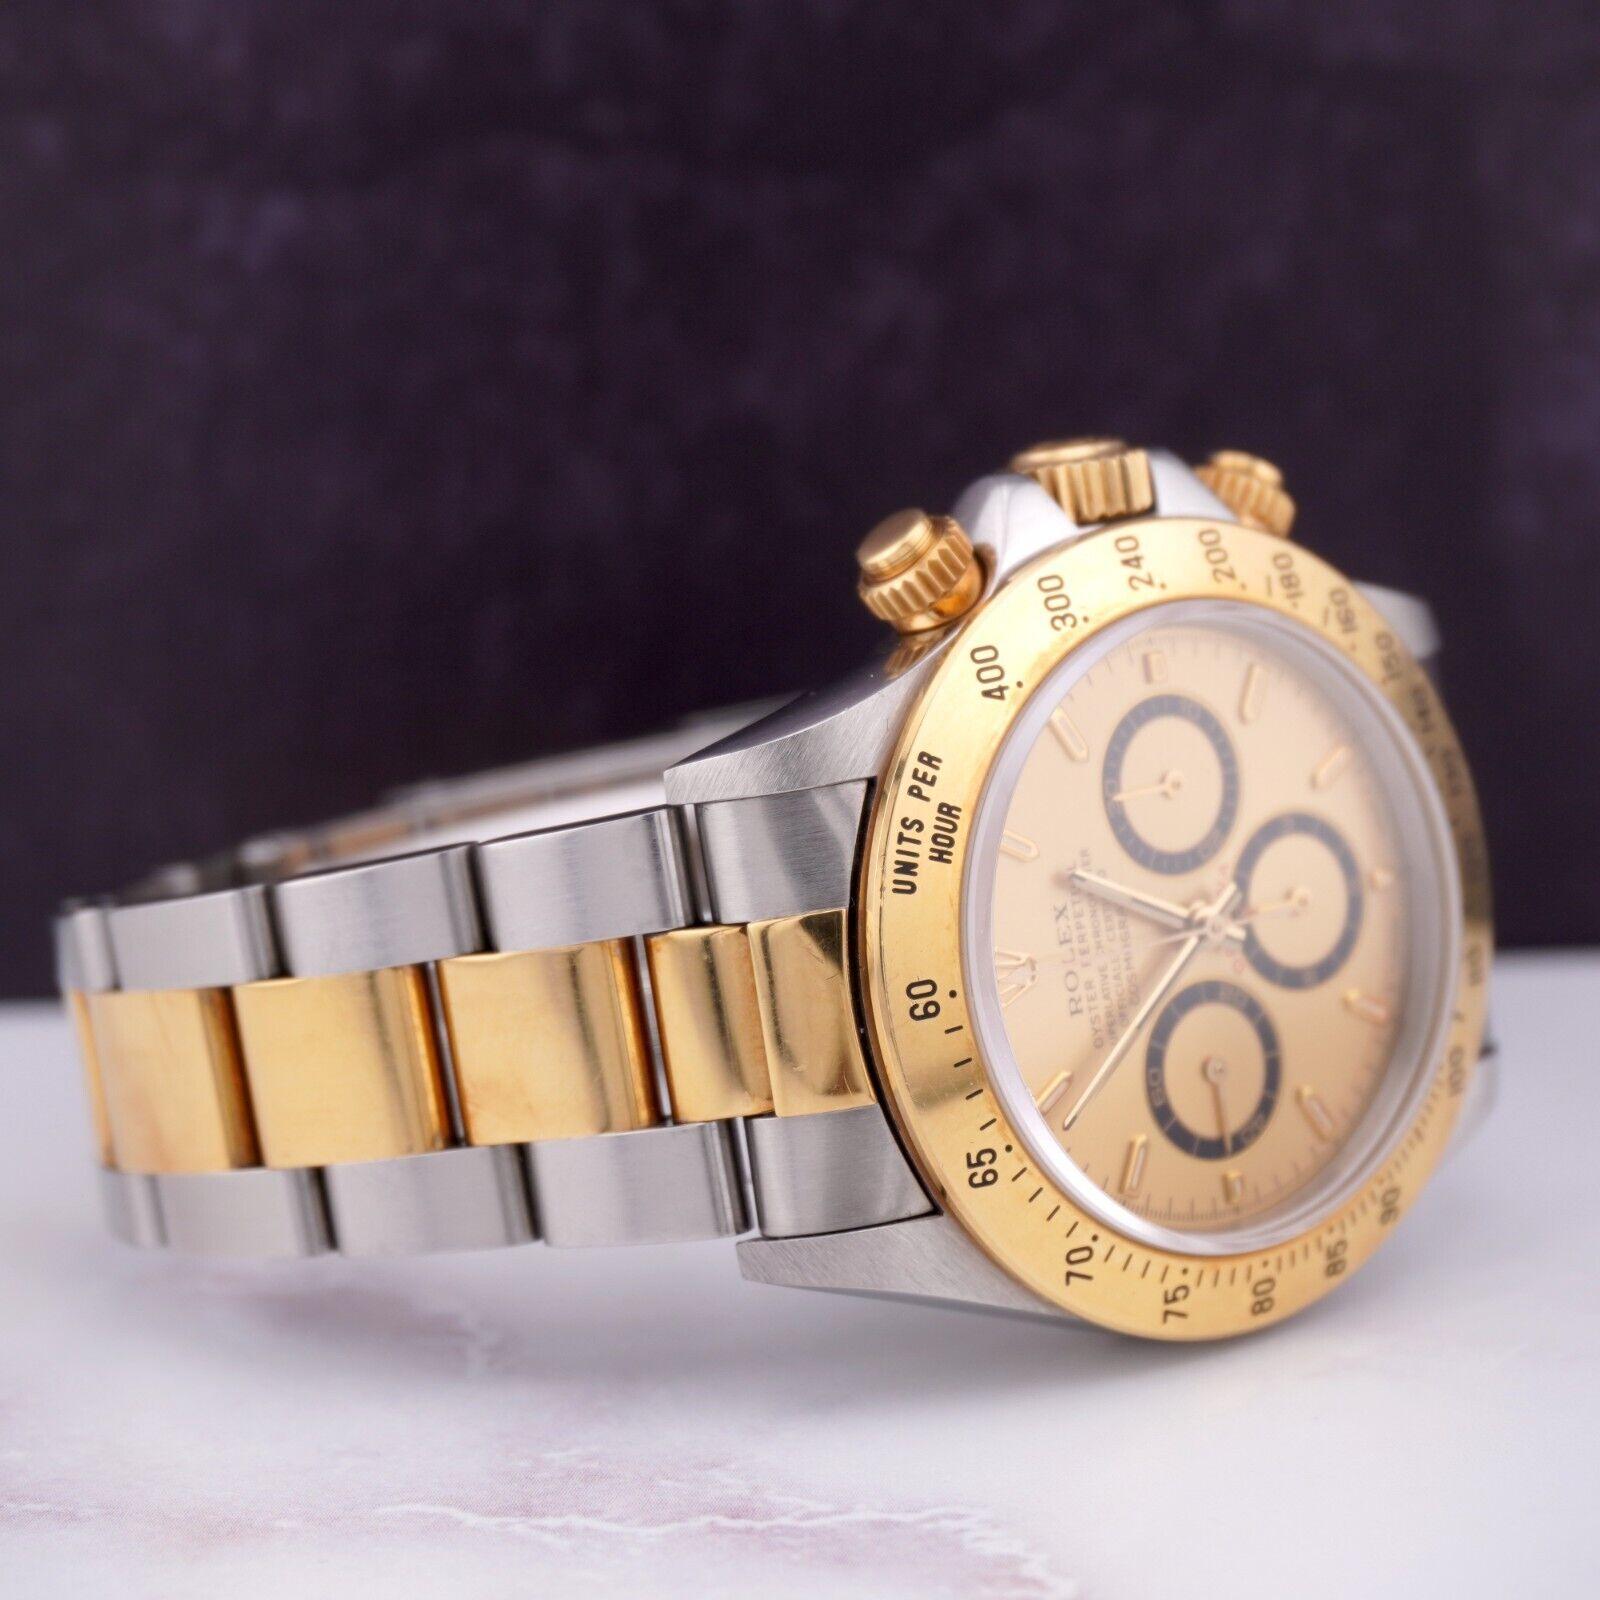 Rolex Daytona 40mm Watch. A Pre-owned watch w/ Gift Box. Watch is 100% Authentic and Comes with Authenticity Card. Watch Reference is 16523 and is in Excellent Condition (See Pictures). The dial color is Gold and material is 18k Yellow Gold. Watch